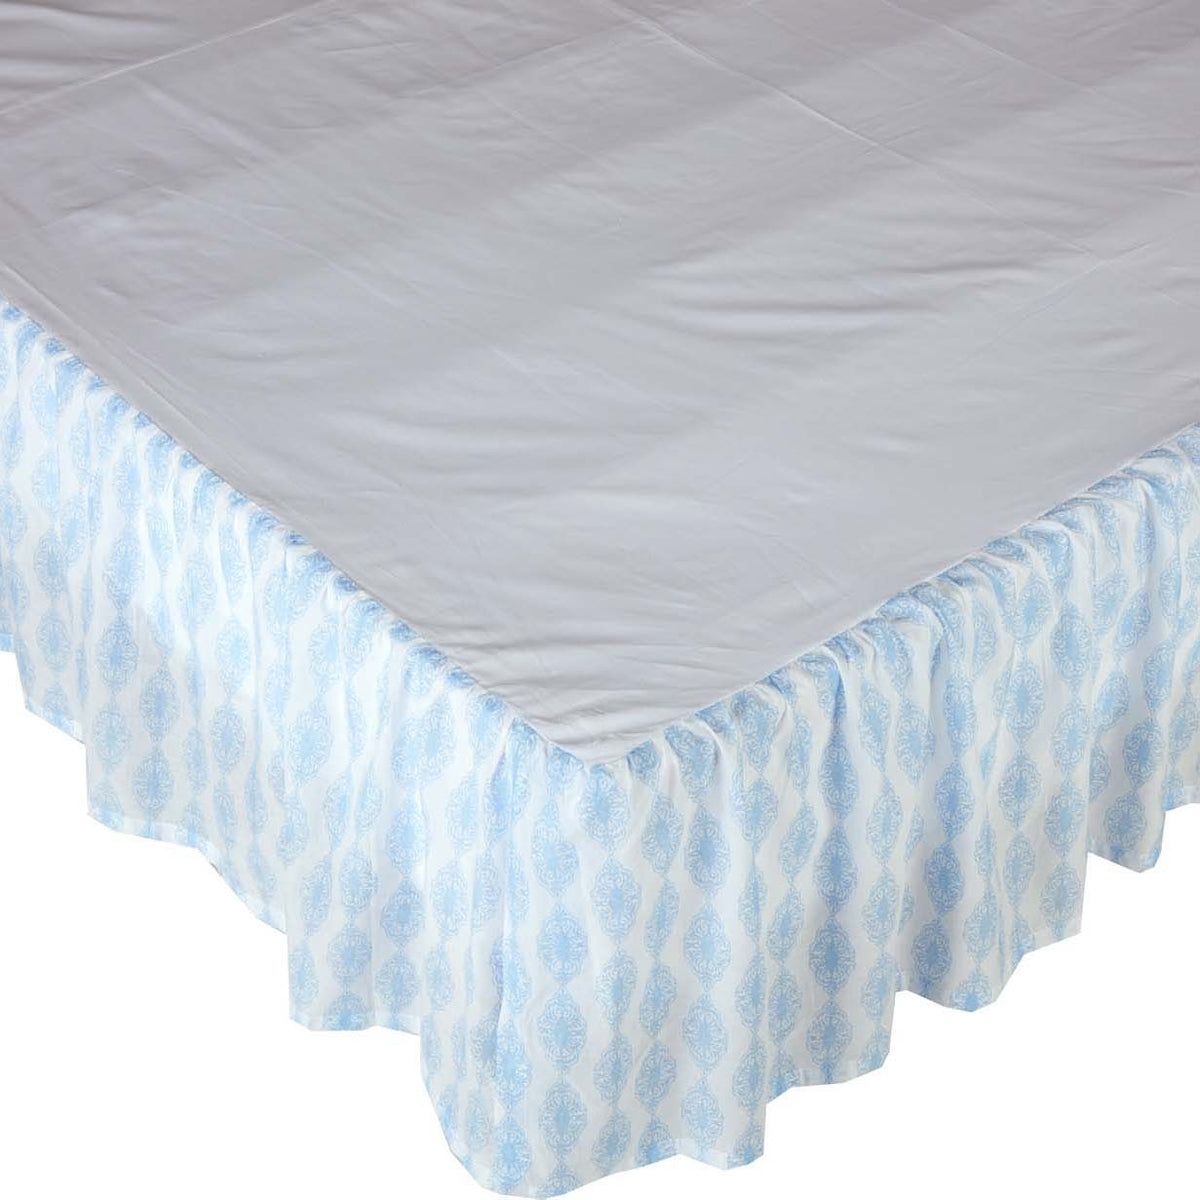 April & Olive Avani Blue King Bed Skirt 78x80x16 By VHC Brands